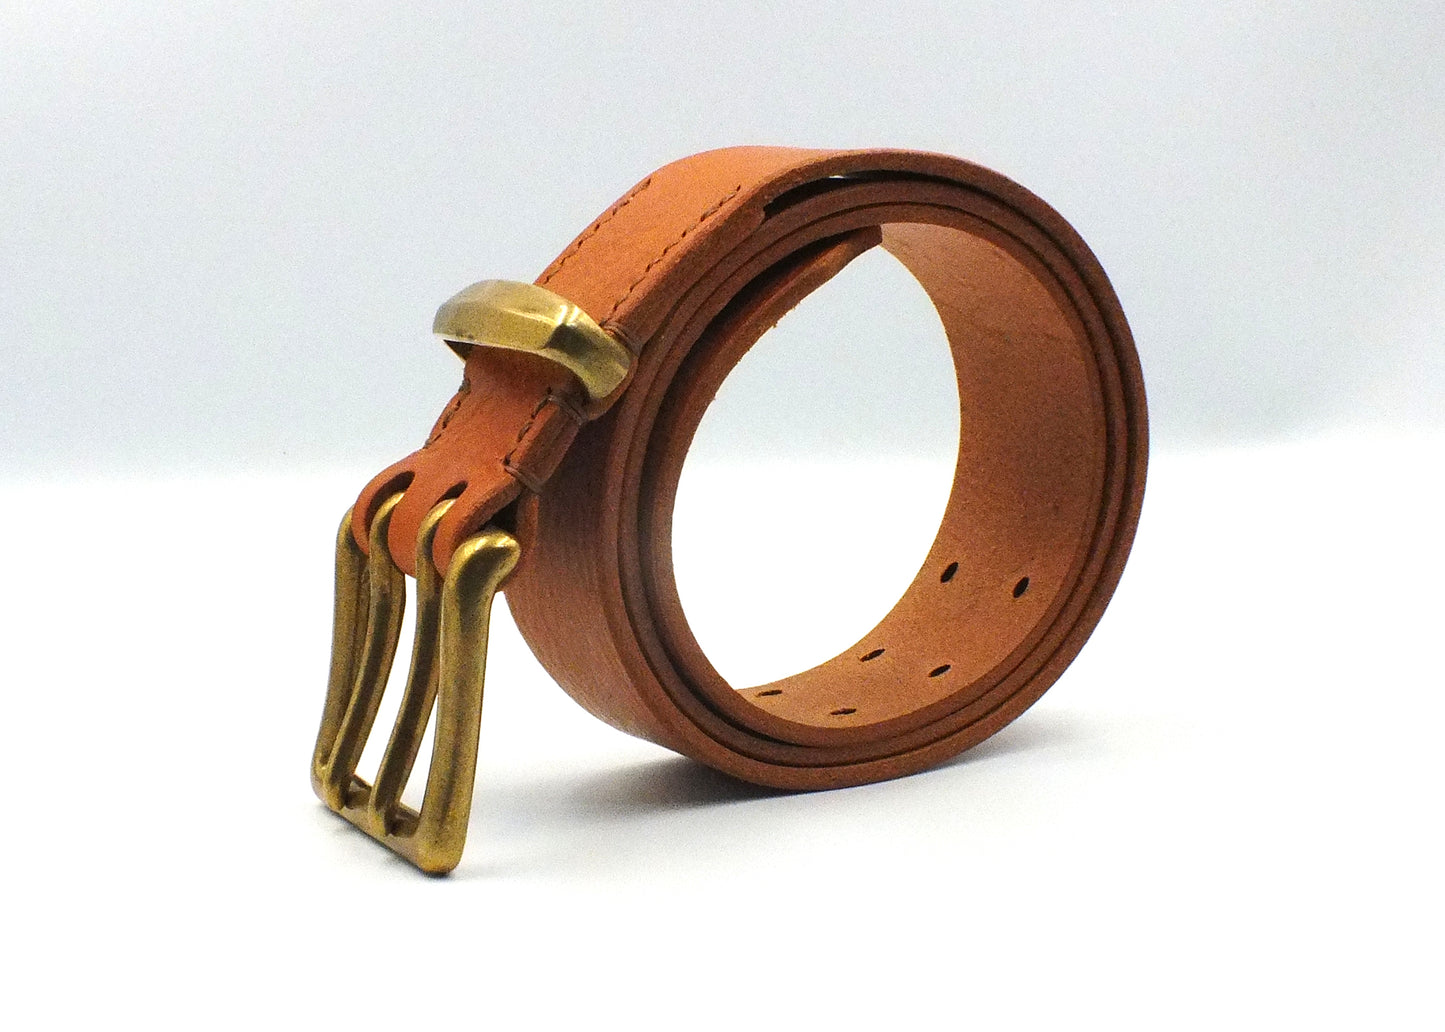 SALE - Tan Leather Belt - 2 prong Brass buckle - 1.5" (38mm wide) - Fit Waist 34" to 38"